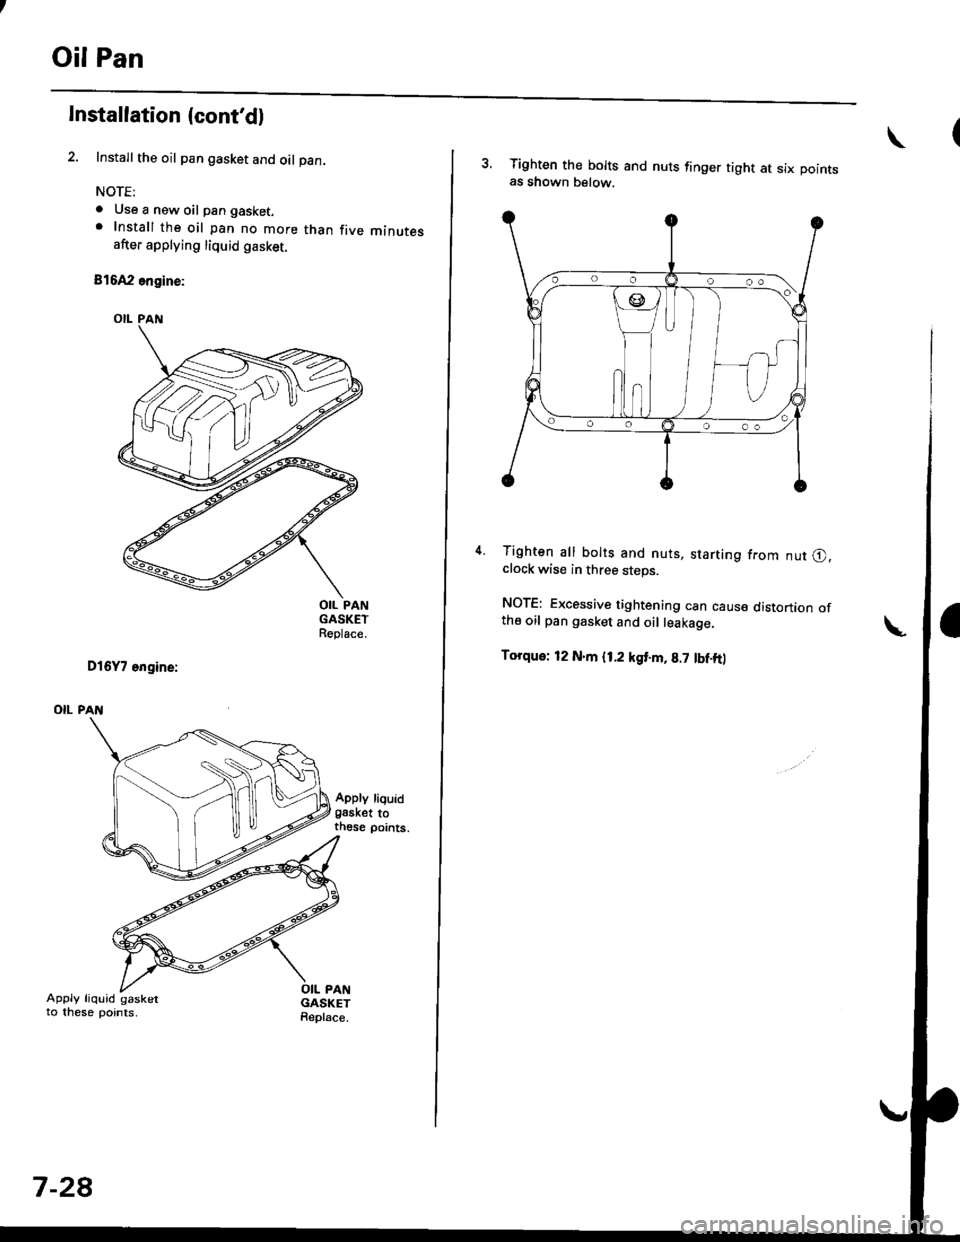 HONDA CIVIC 1996 6.G User Guide Oil Pan
lnstallation (contdl
Install the oil pan gasket and oil pan
NOTE:
a Use a new oil pan gasket.. Install the oil pan no more than five minutesafter applying liquid gasket.
816A2 engine:
OIL PAN